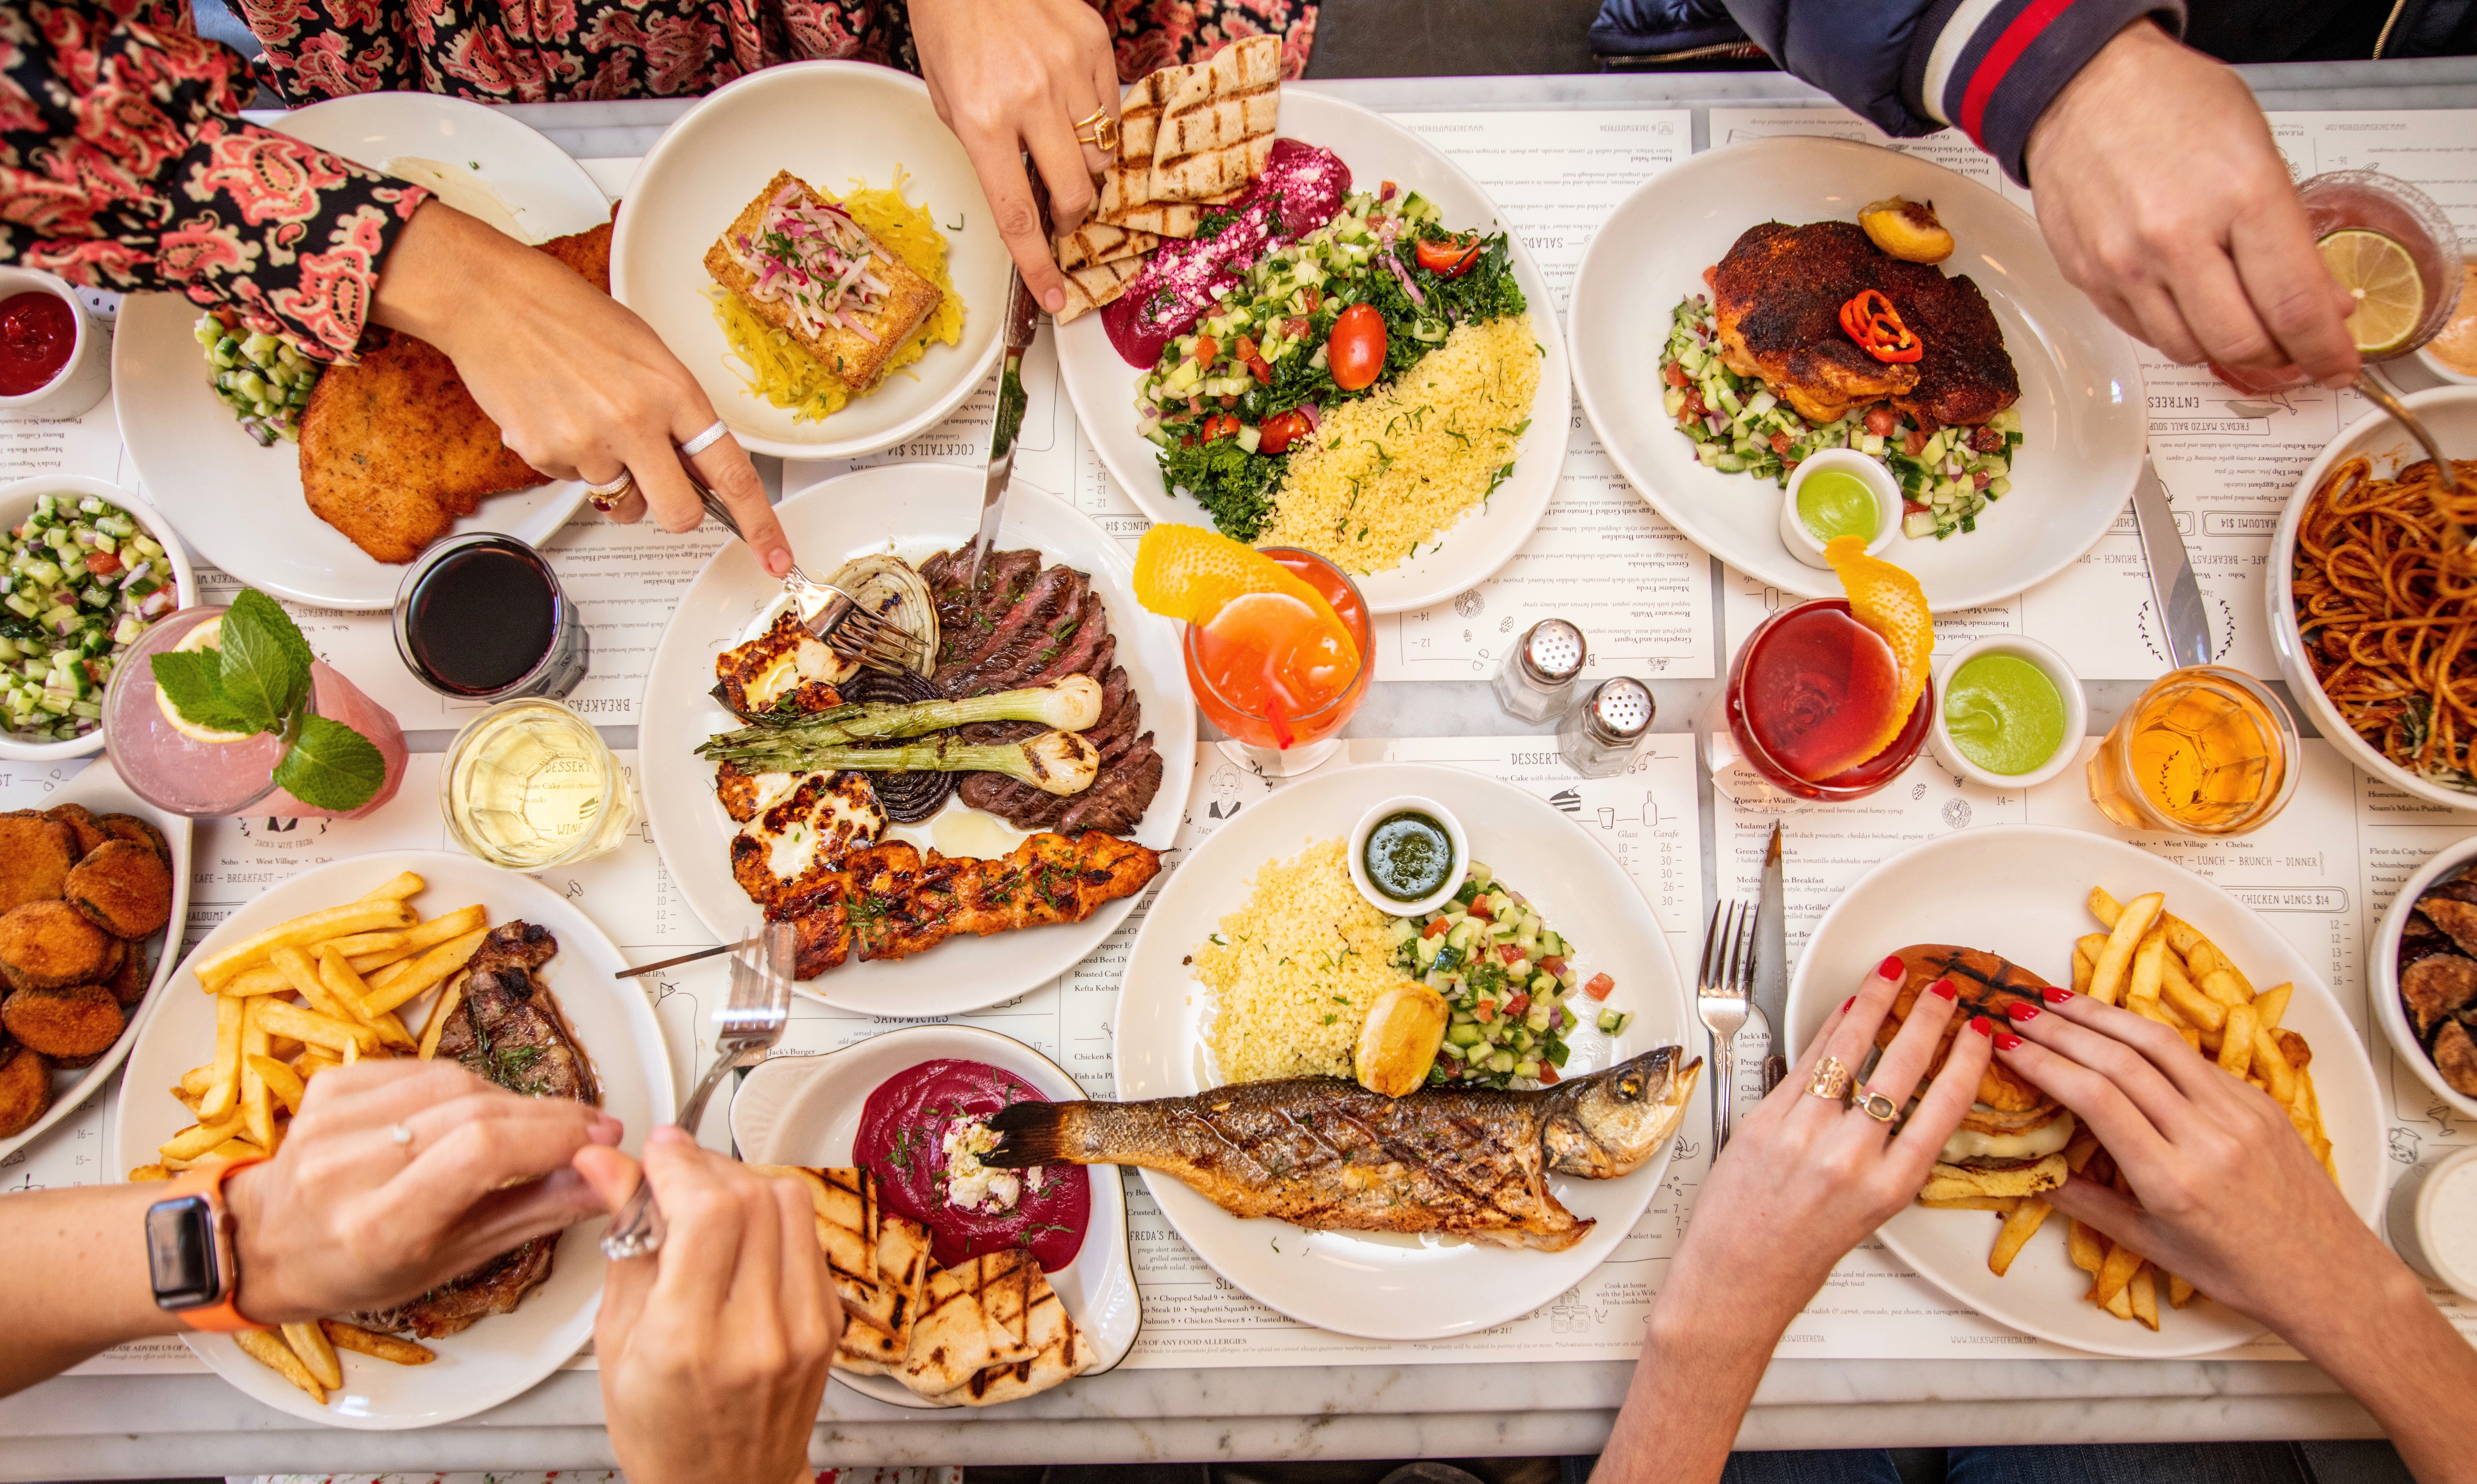 Large table of food and plates with hands grabbing for food